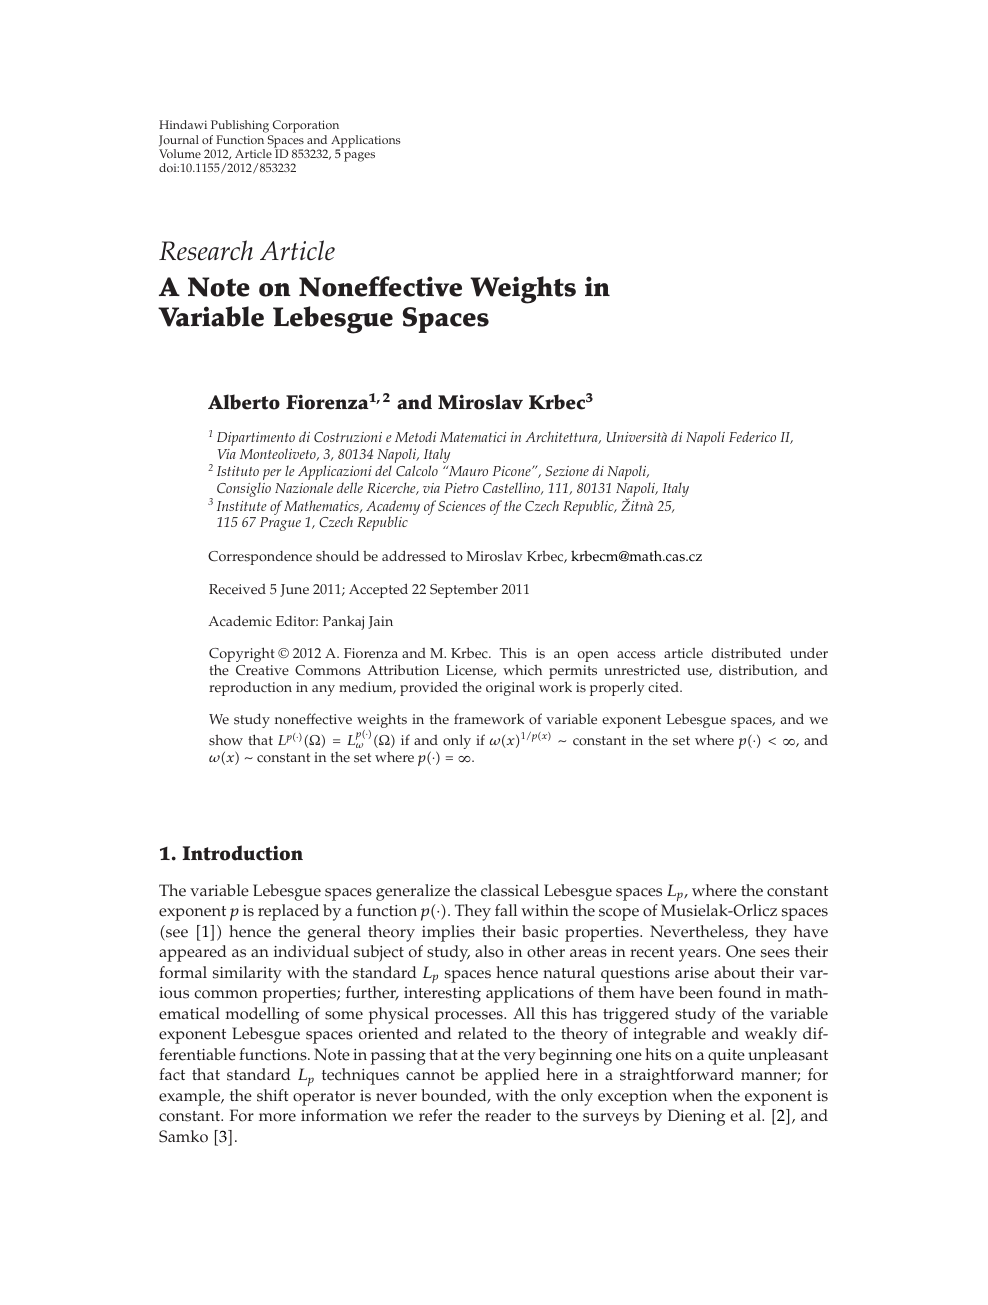 A Note On Noneffective Weights In Variable Lebesgue Spaces Topic Of Research Paper In Mathematics Download Scholarly Article Pdf And Read For Free On Cyberleninka Open Science Hub